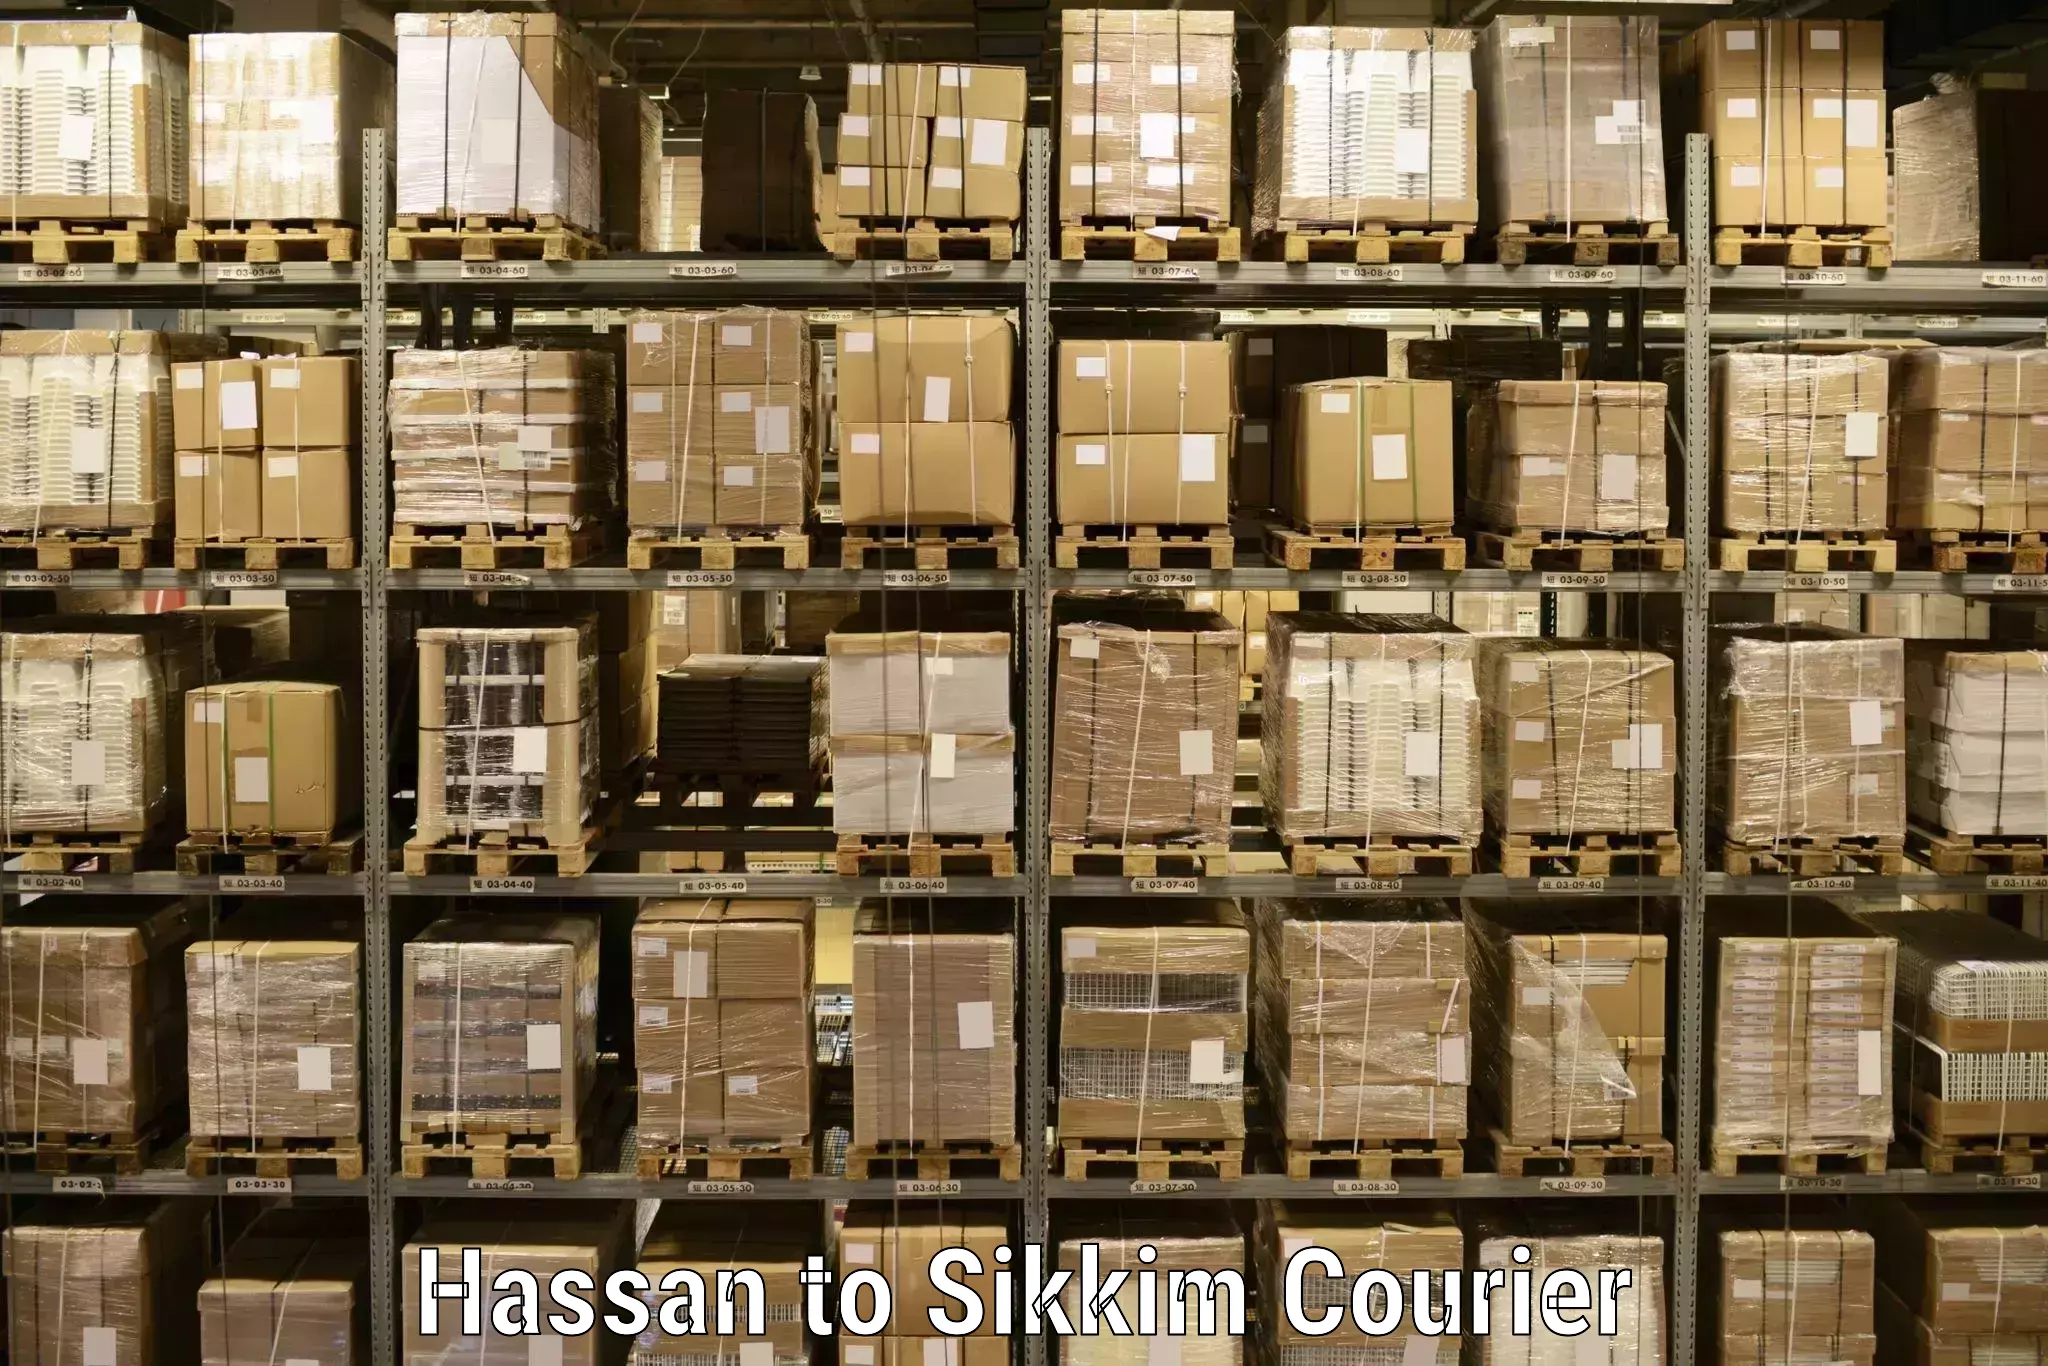 Advanced shipping network Hassan to South Sikkim